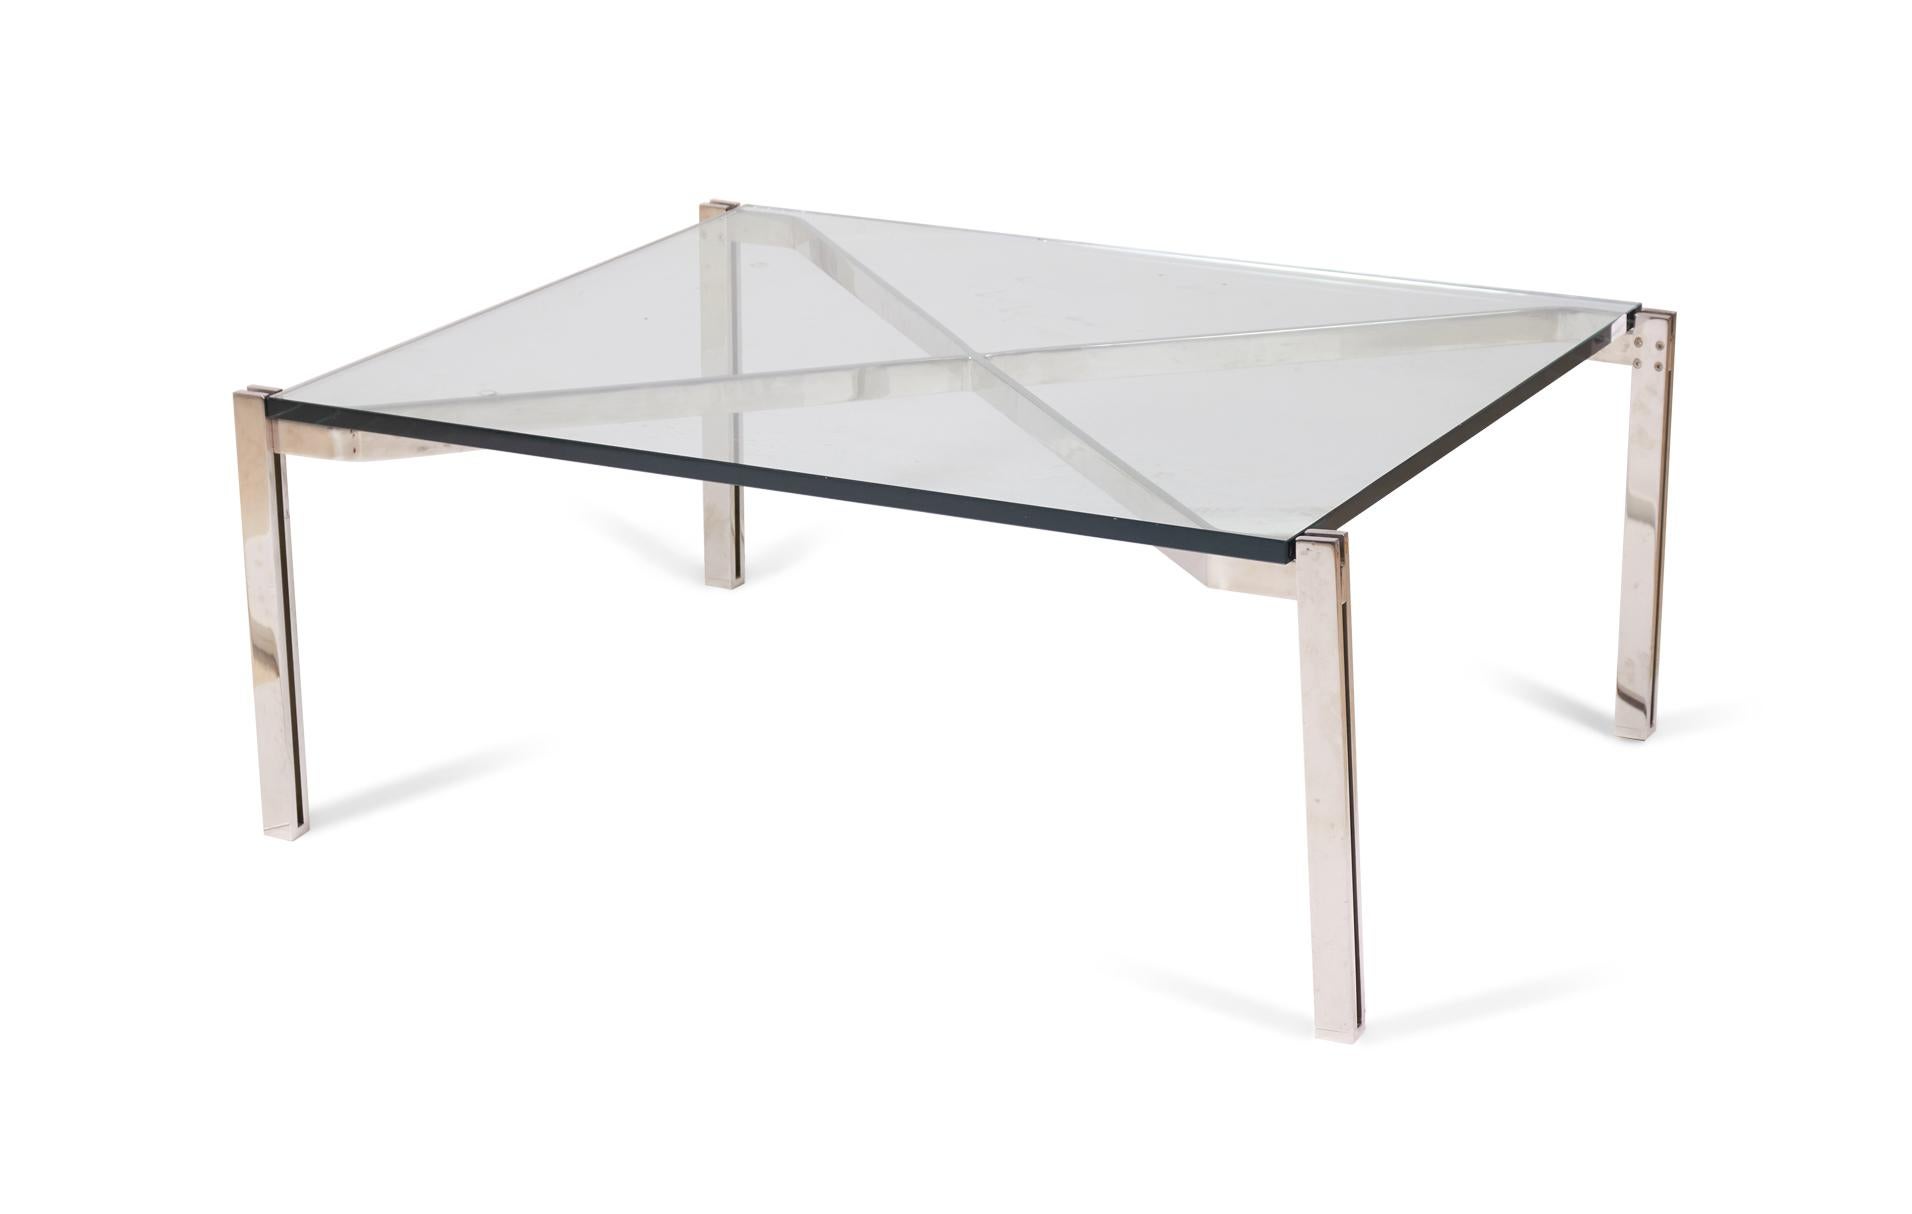 Italian Modernist 'X' Frame Steel and Glass Coffee Table 'Manner of B&B Italia' For Sale 1